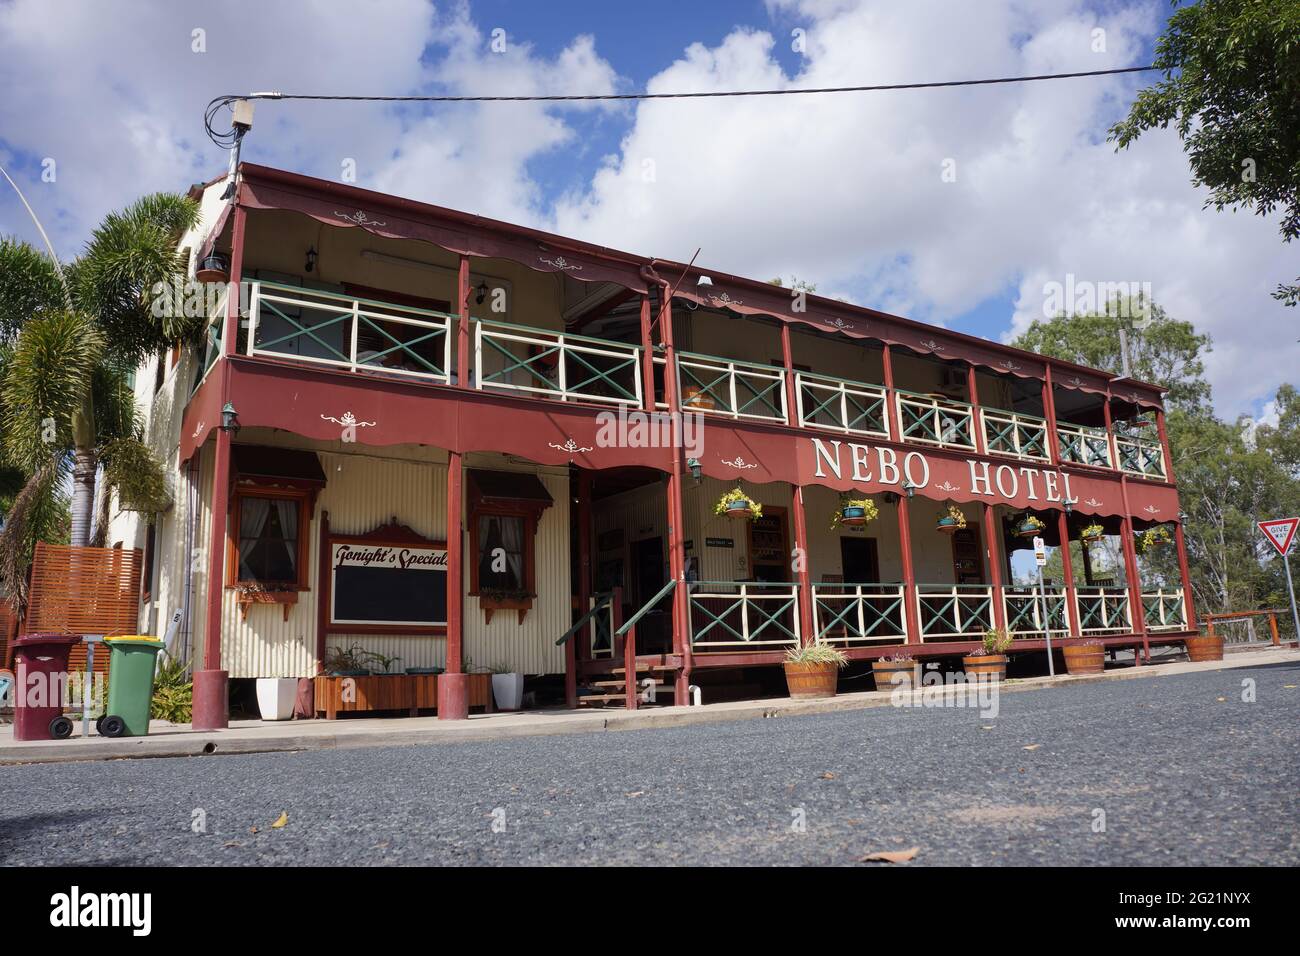 The historic and heritage listed old Nebo Hotel, built in 1886 in the Queenslander style, has wide verandas and corrugated iron walls. Stock Photo